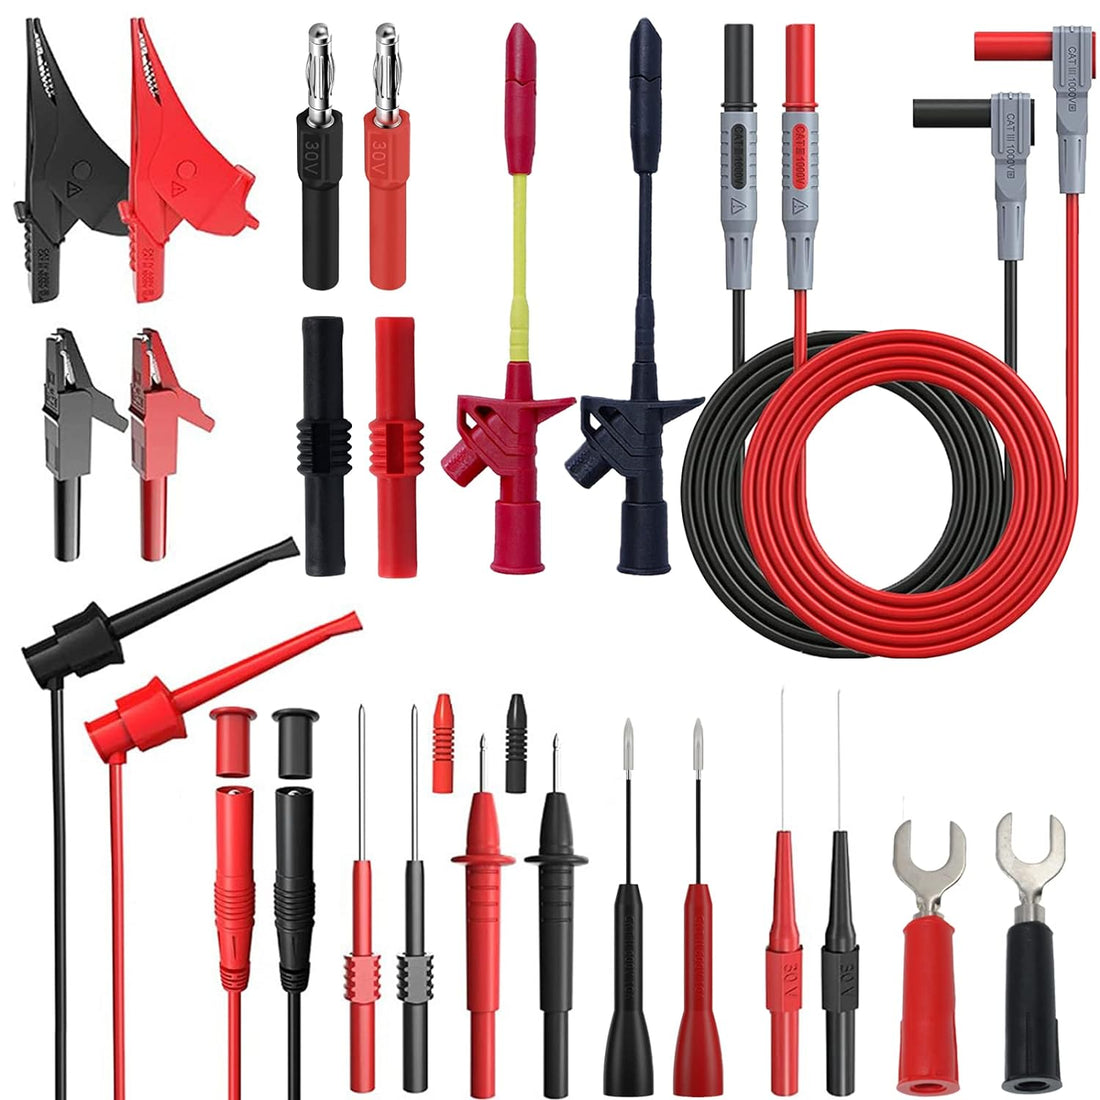 25PCS Silicone Multimeter Test Leads Kit